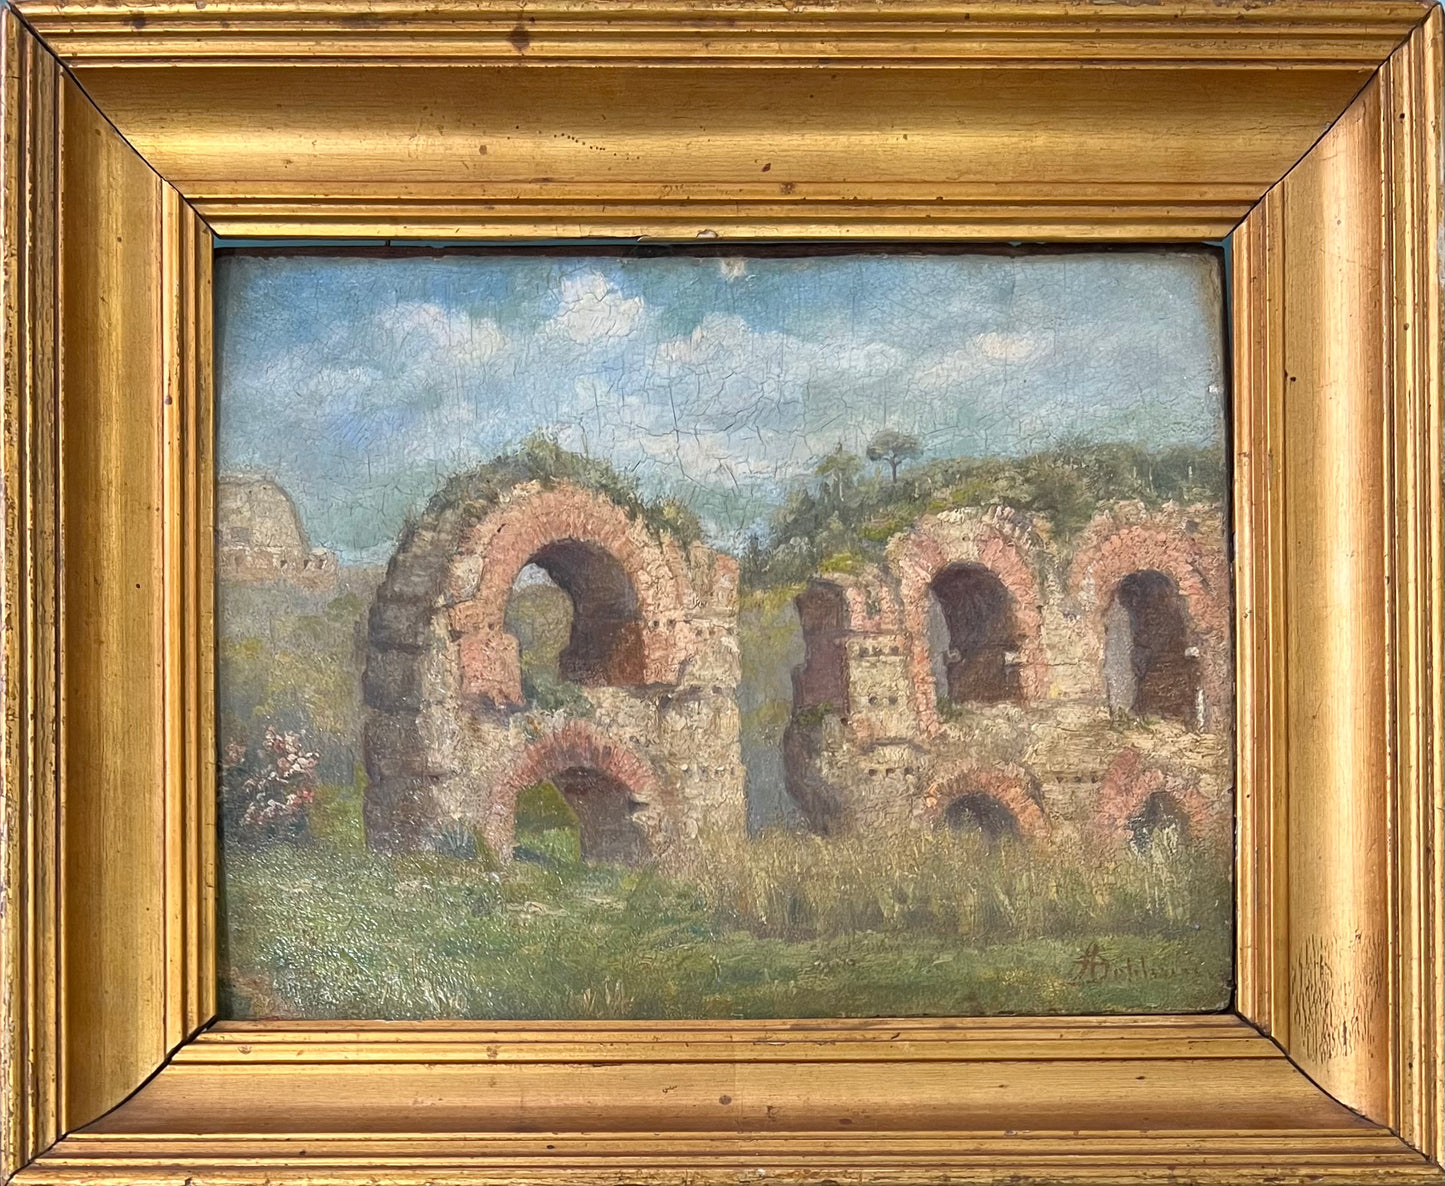 Augusta Dohlmann. Study of an aquaduct,Italy, ca. 1890